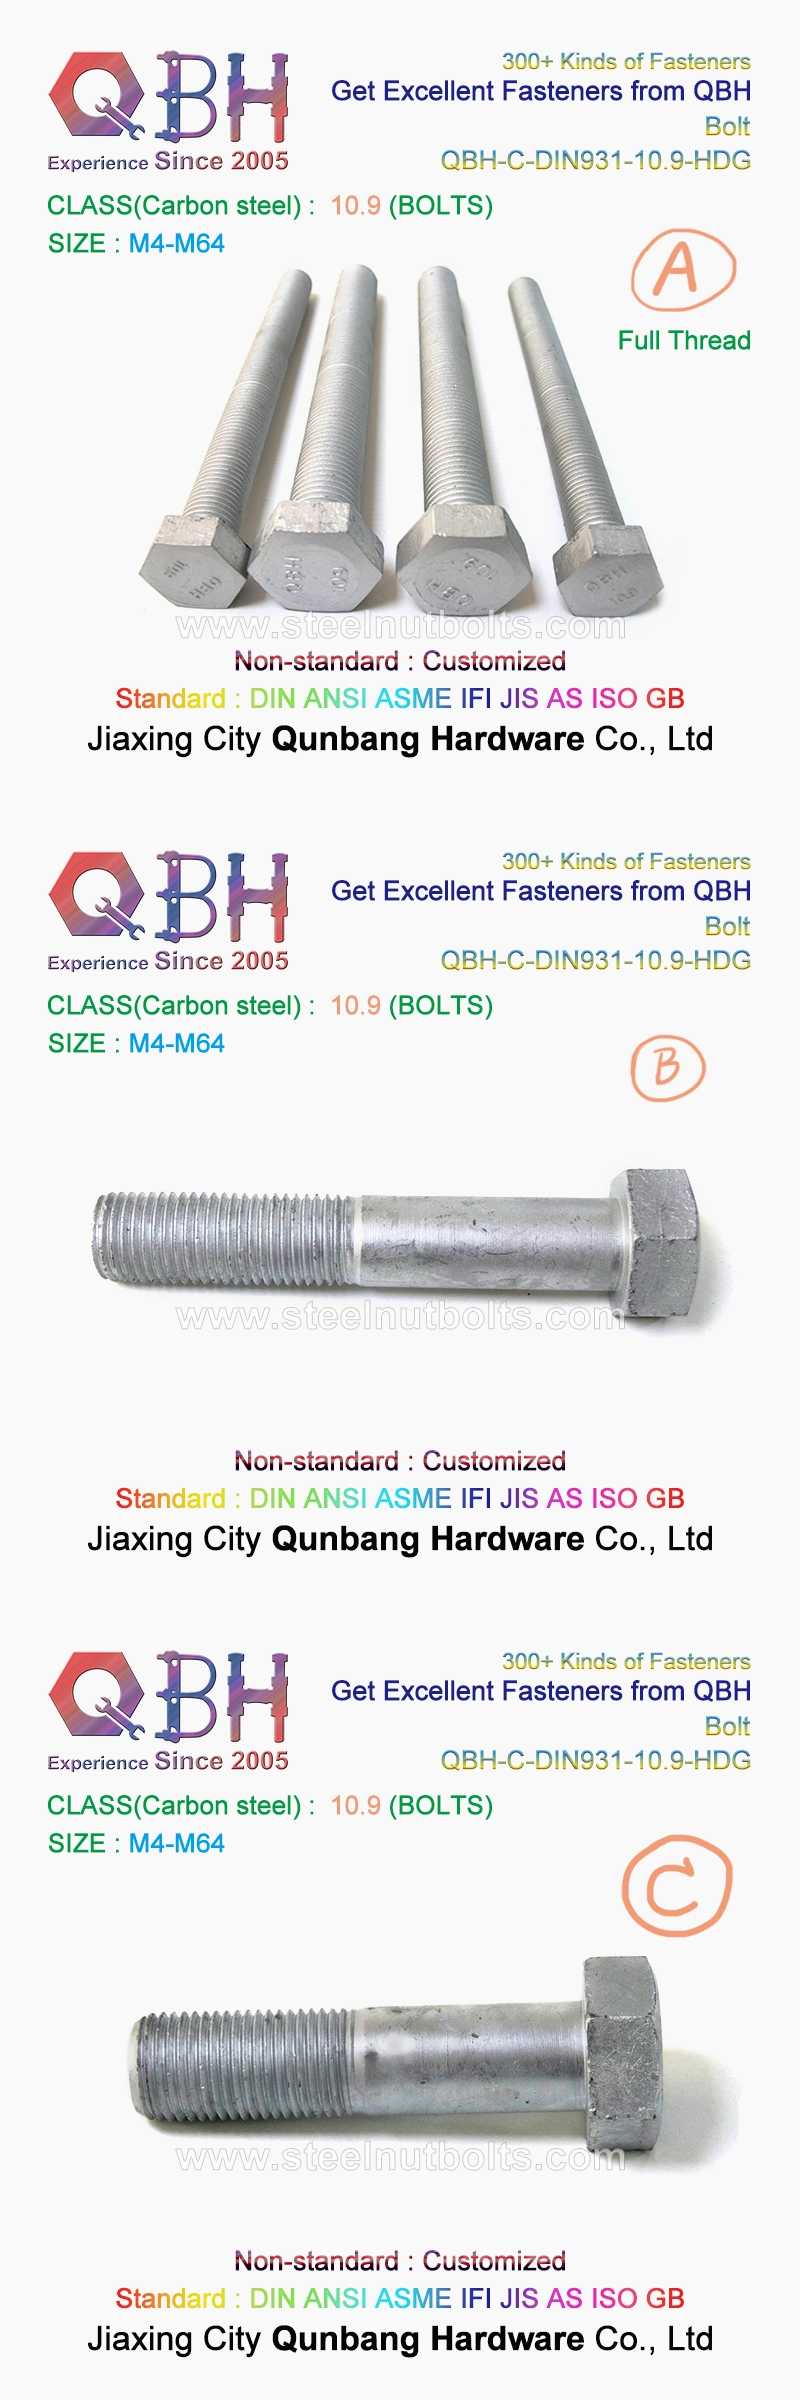 Qbh DIN931/DIN933 35CrMo Full Thread/Half Thread HDG Hex Bolt and Single Chamfered Nut Assemble